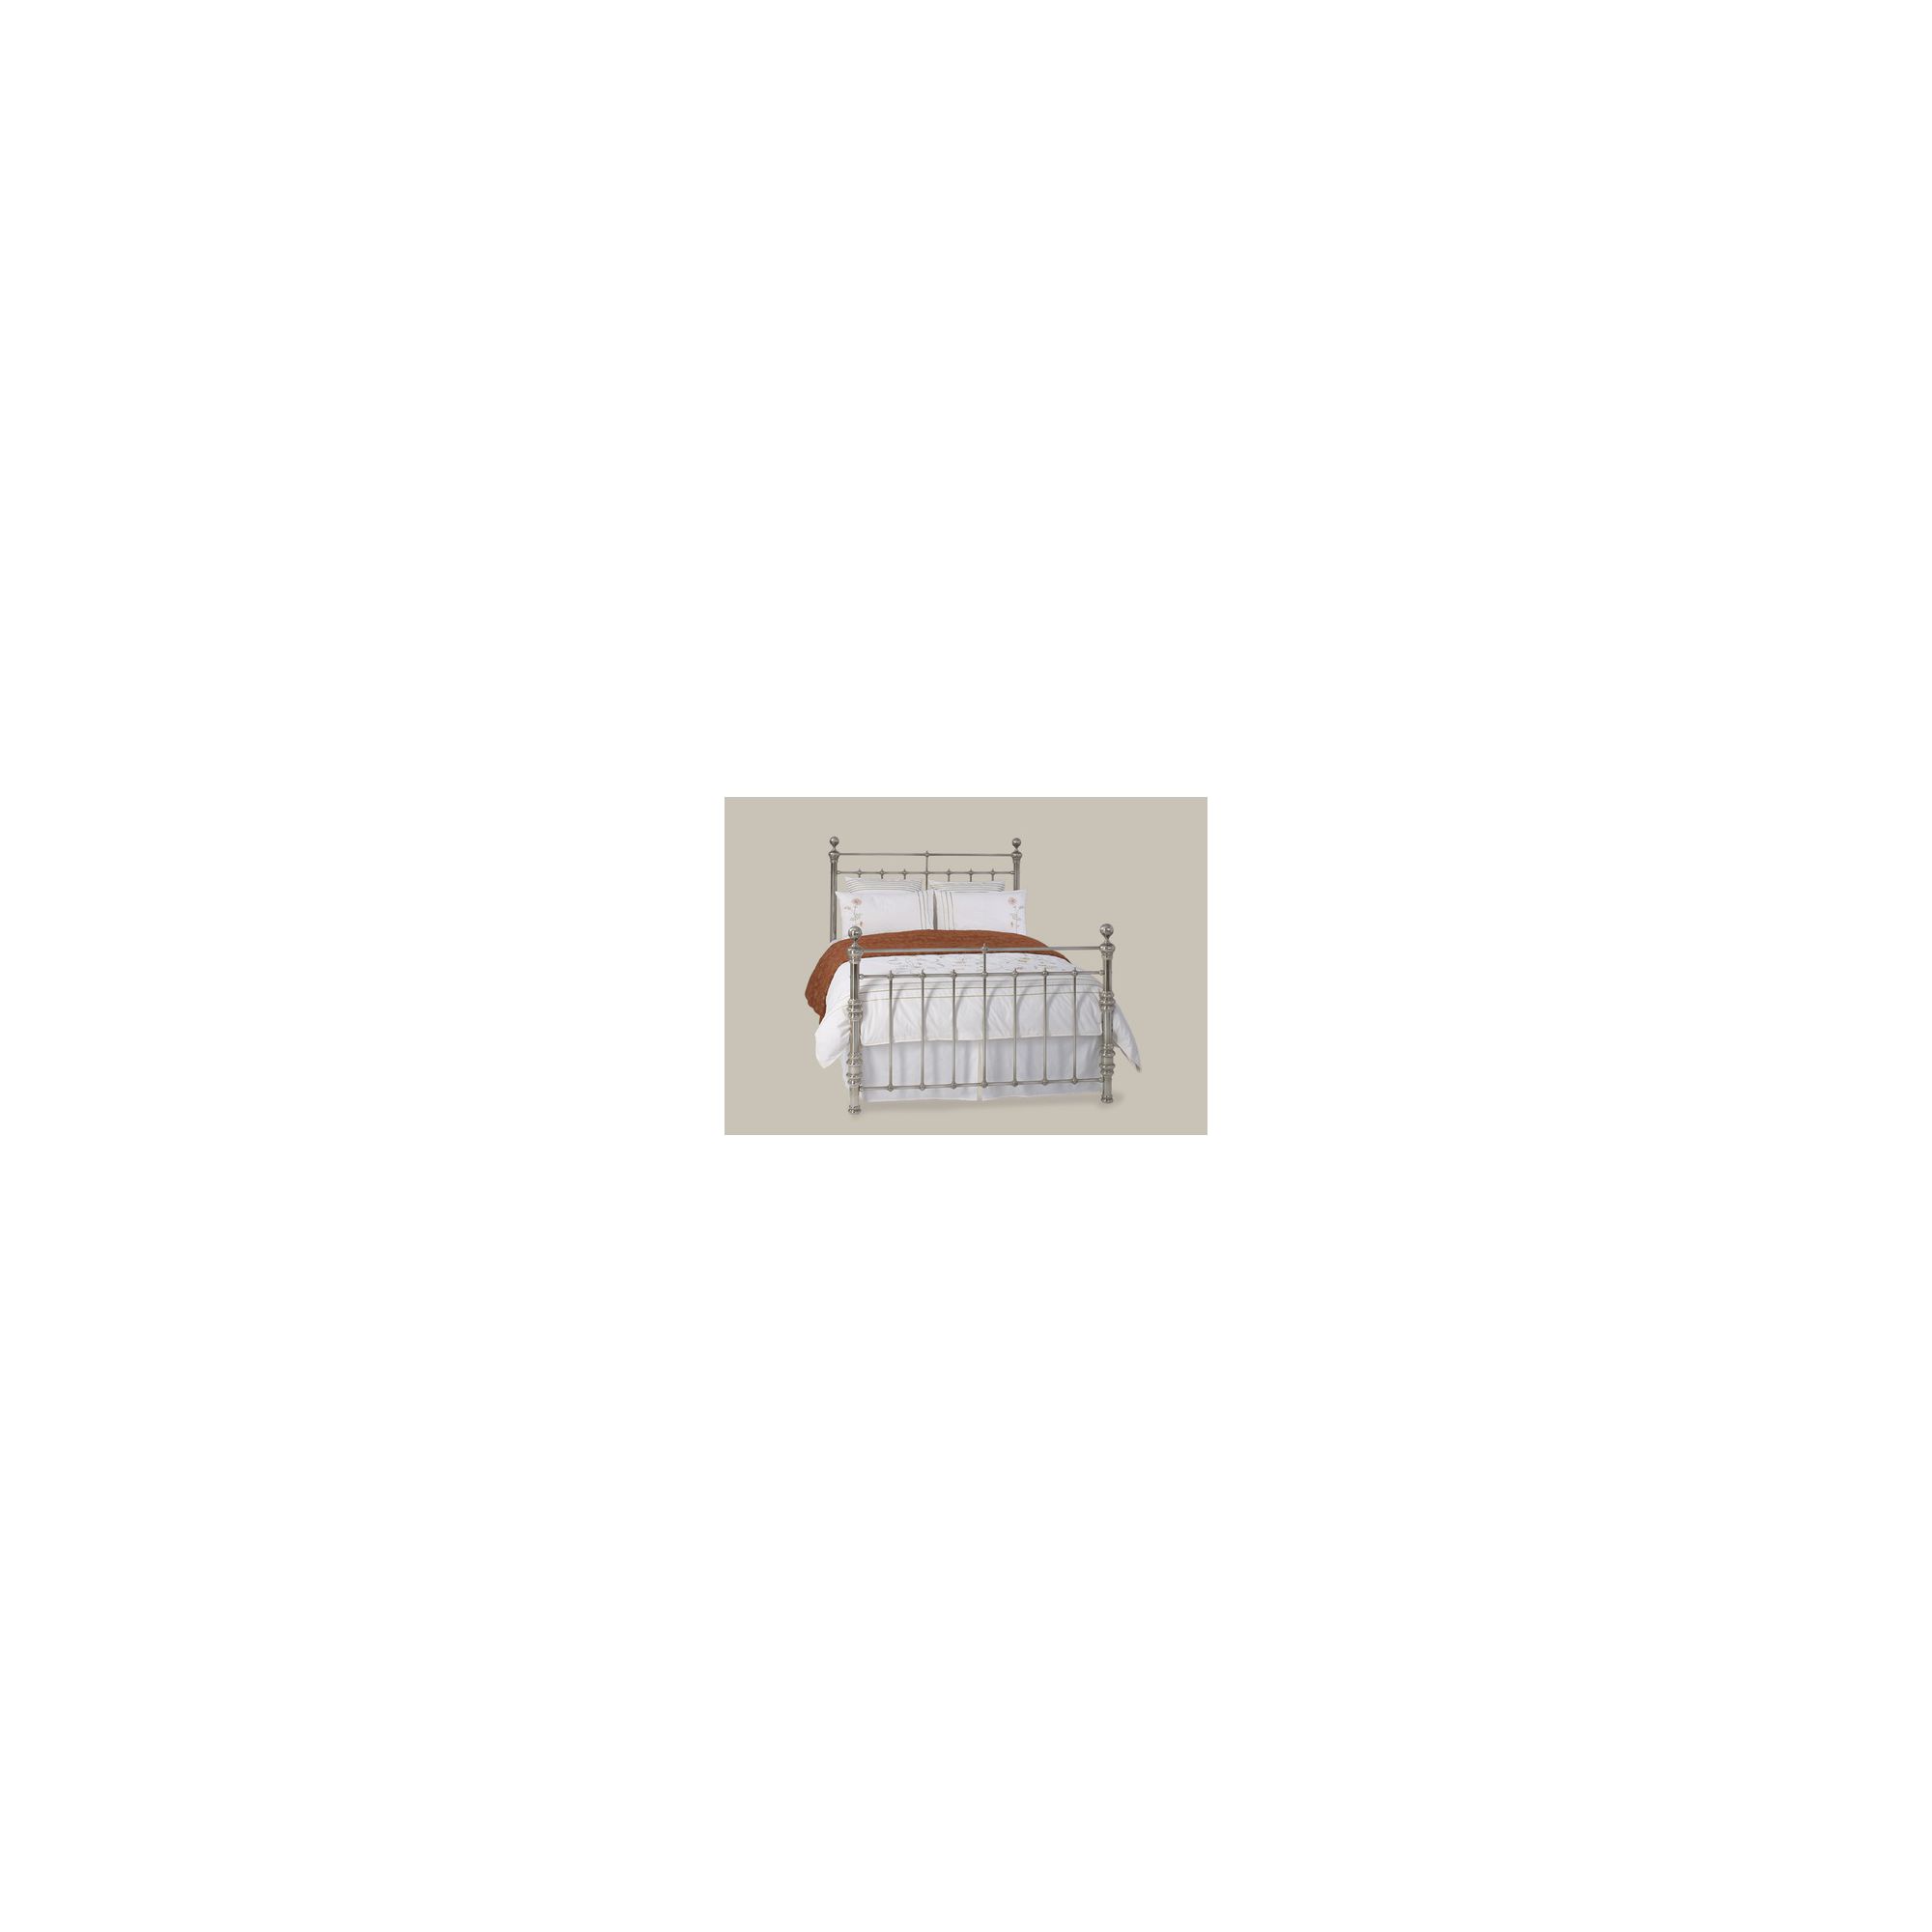 OBC Lerwick Bed Frame - King at Tesco Direct